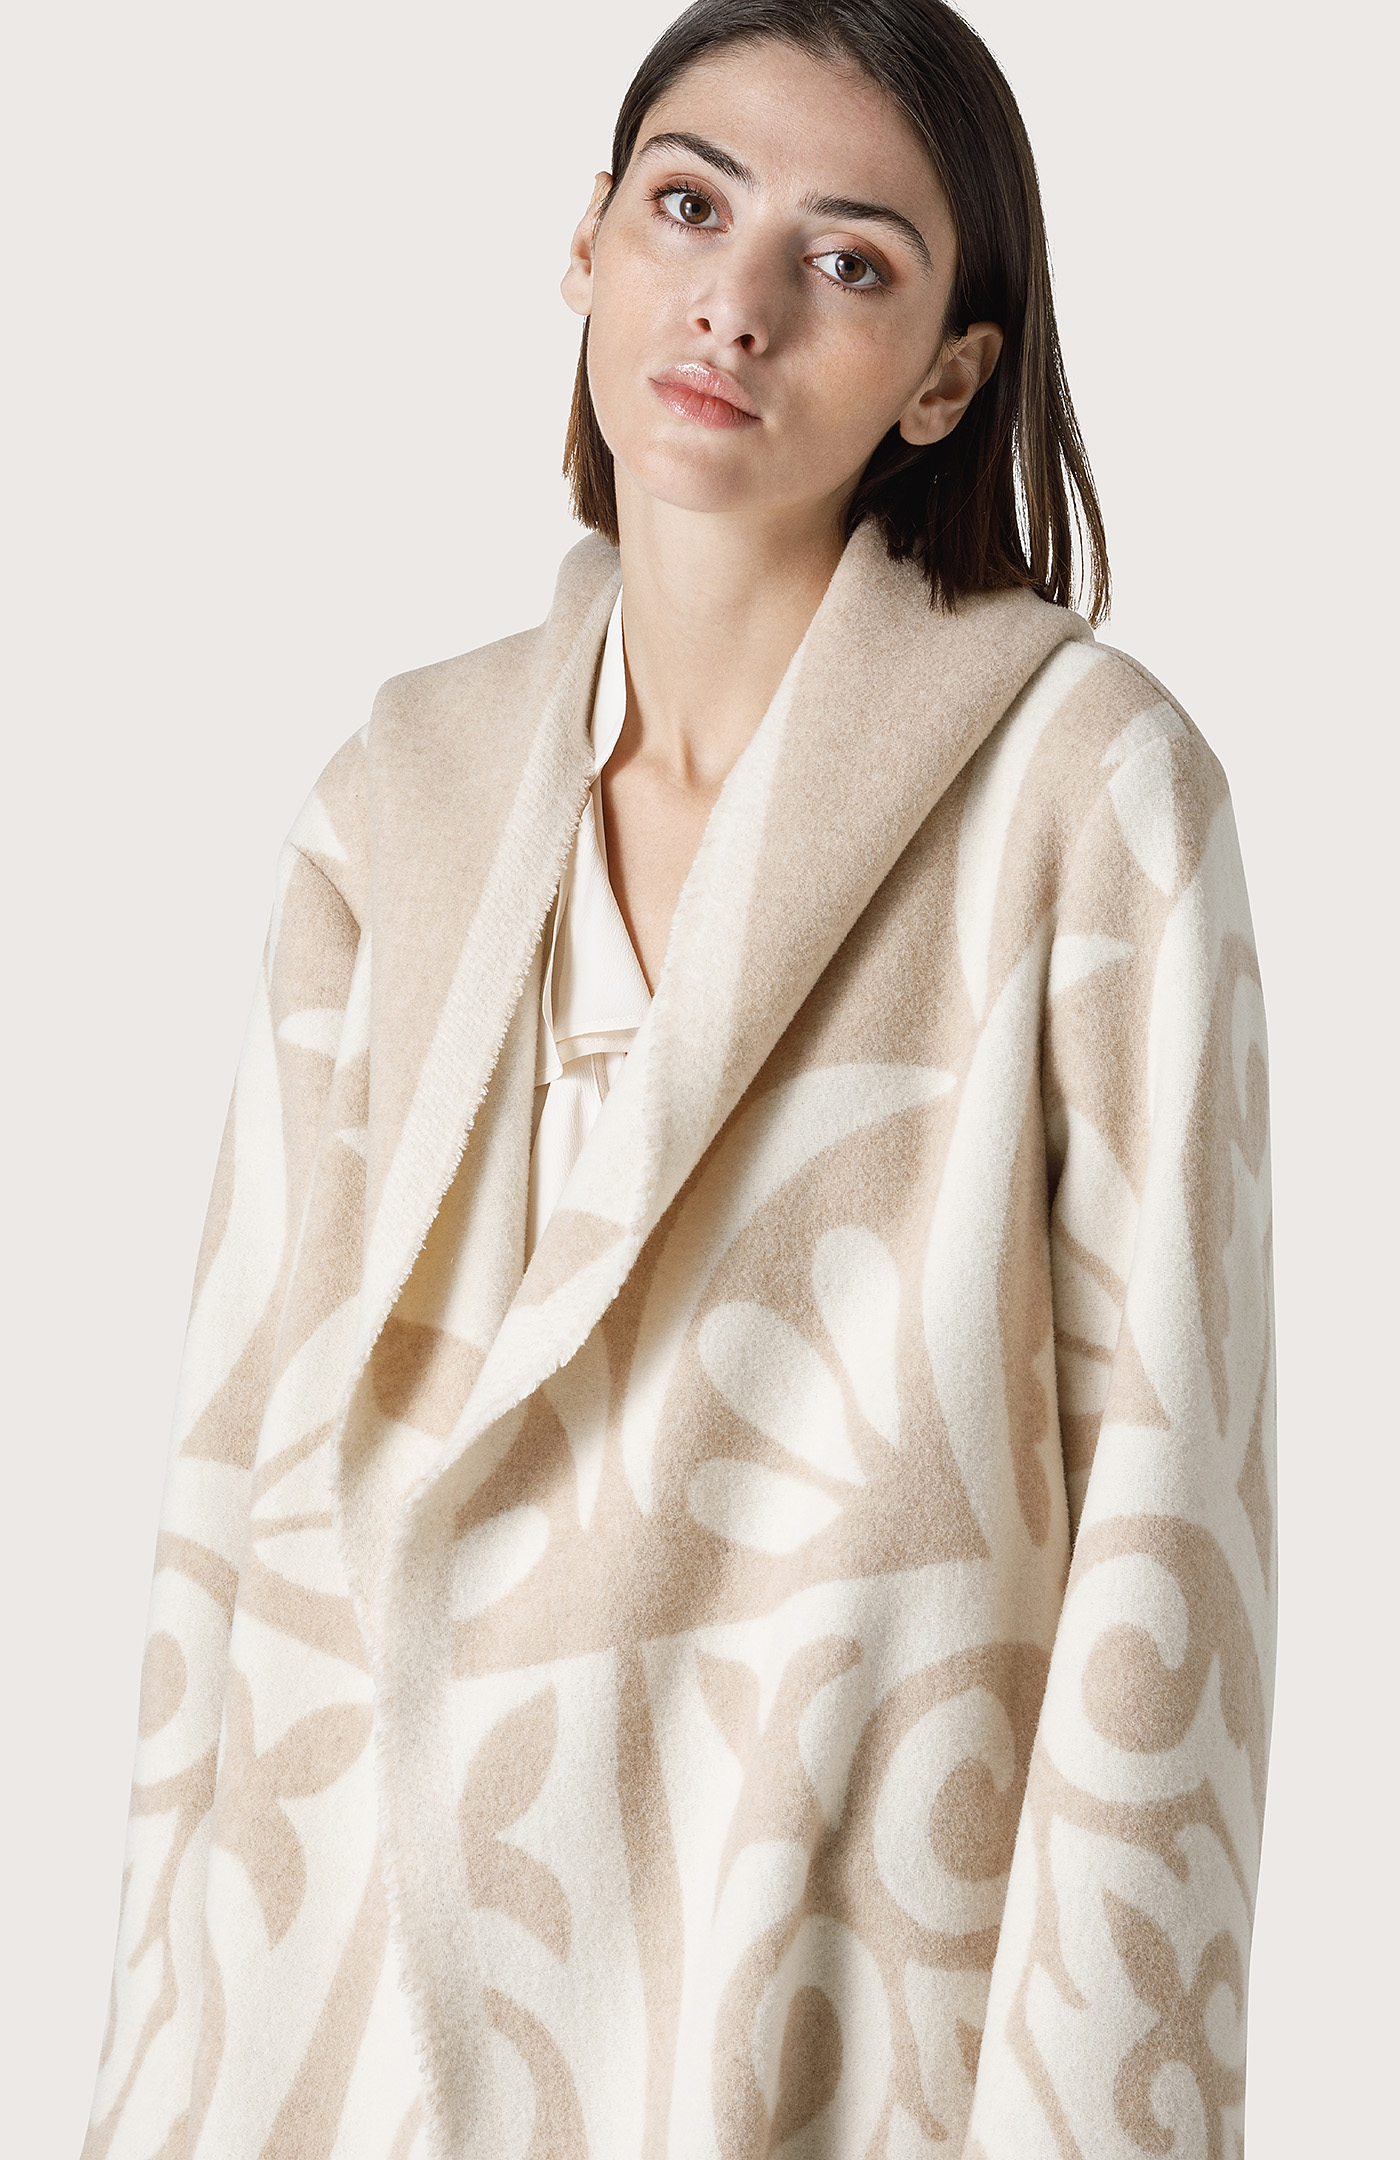 Dressing gown-style coat